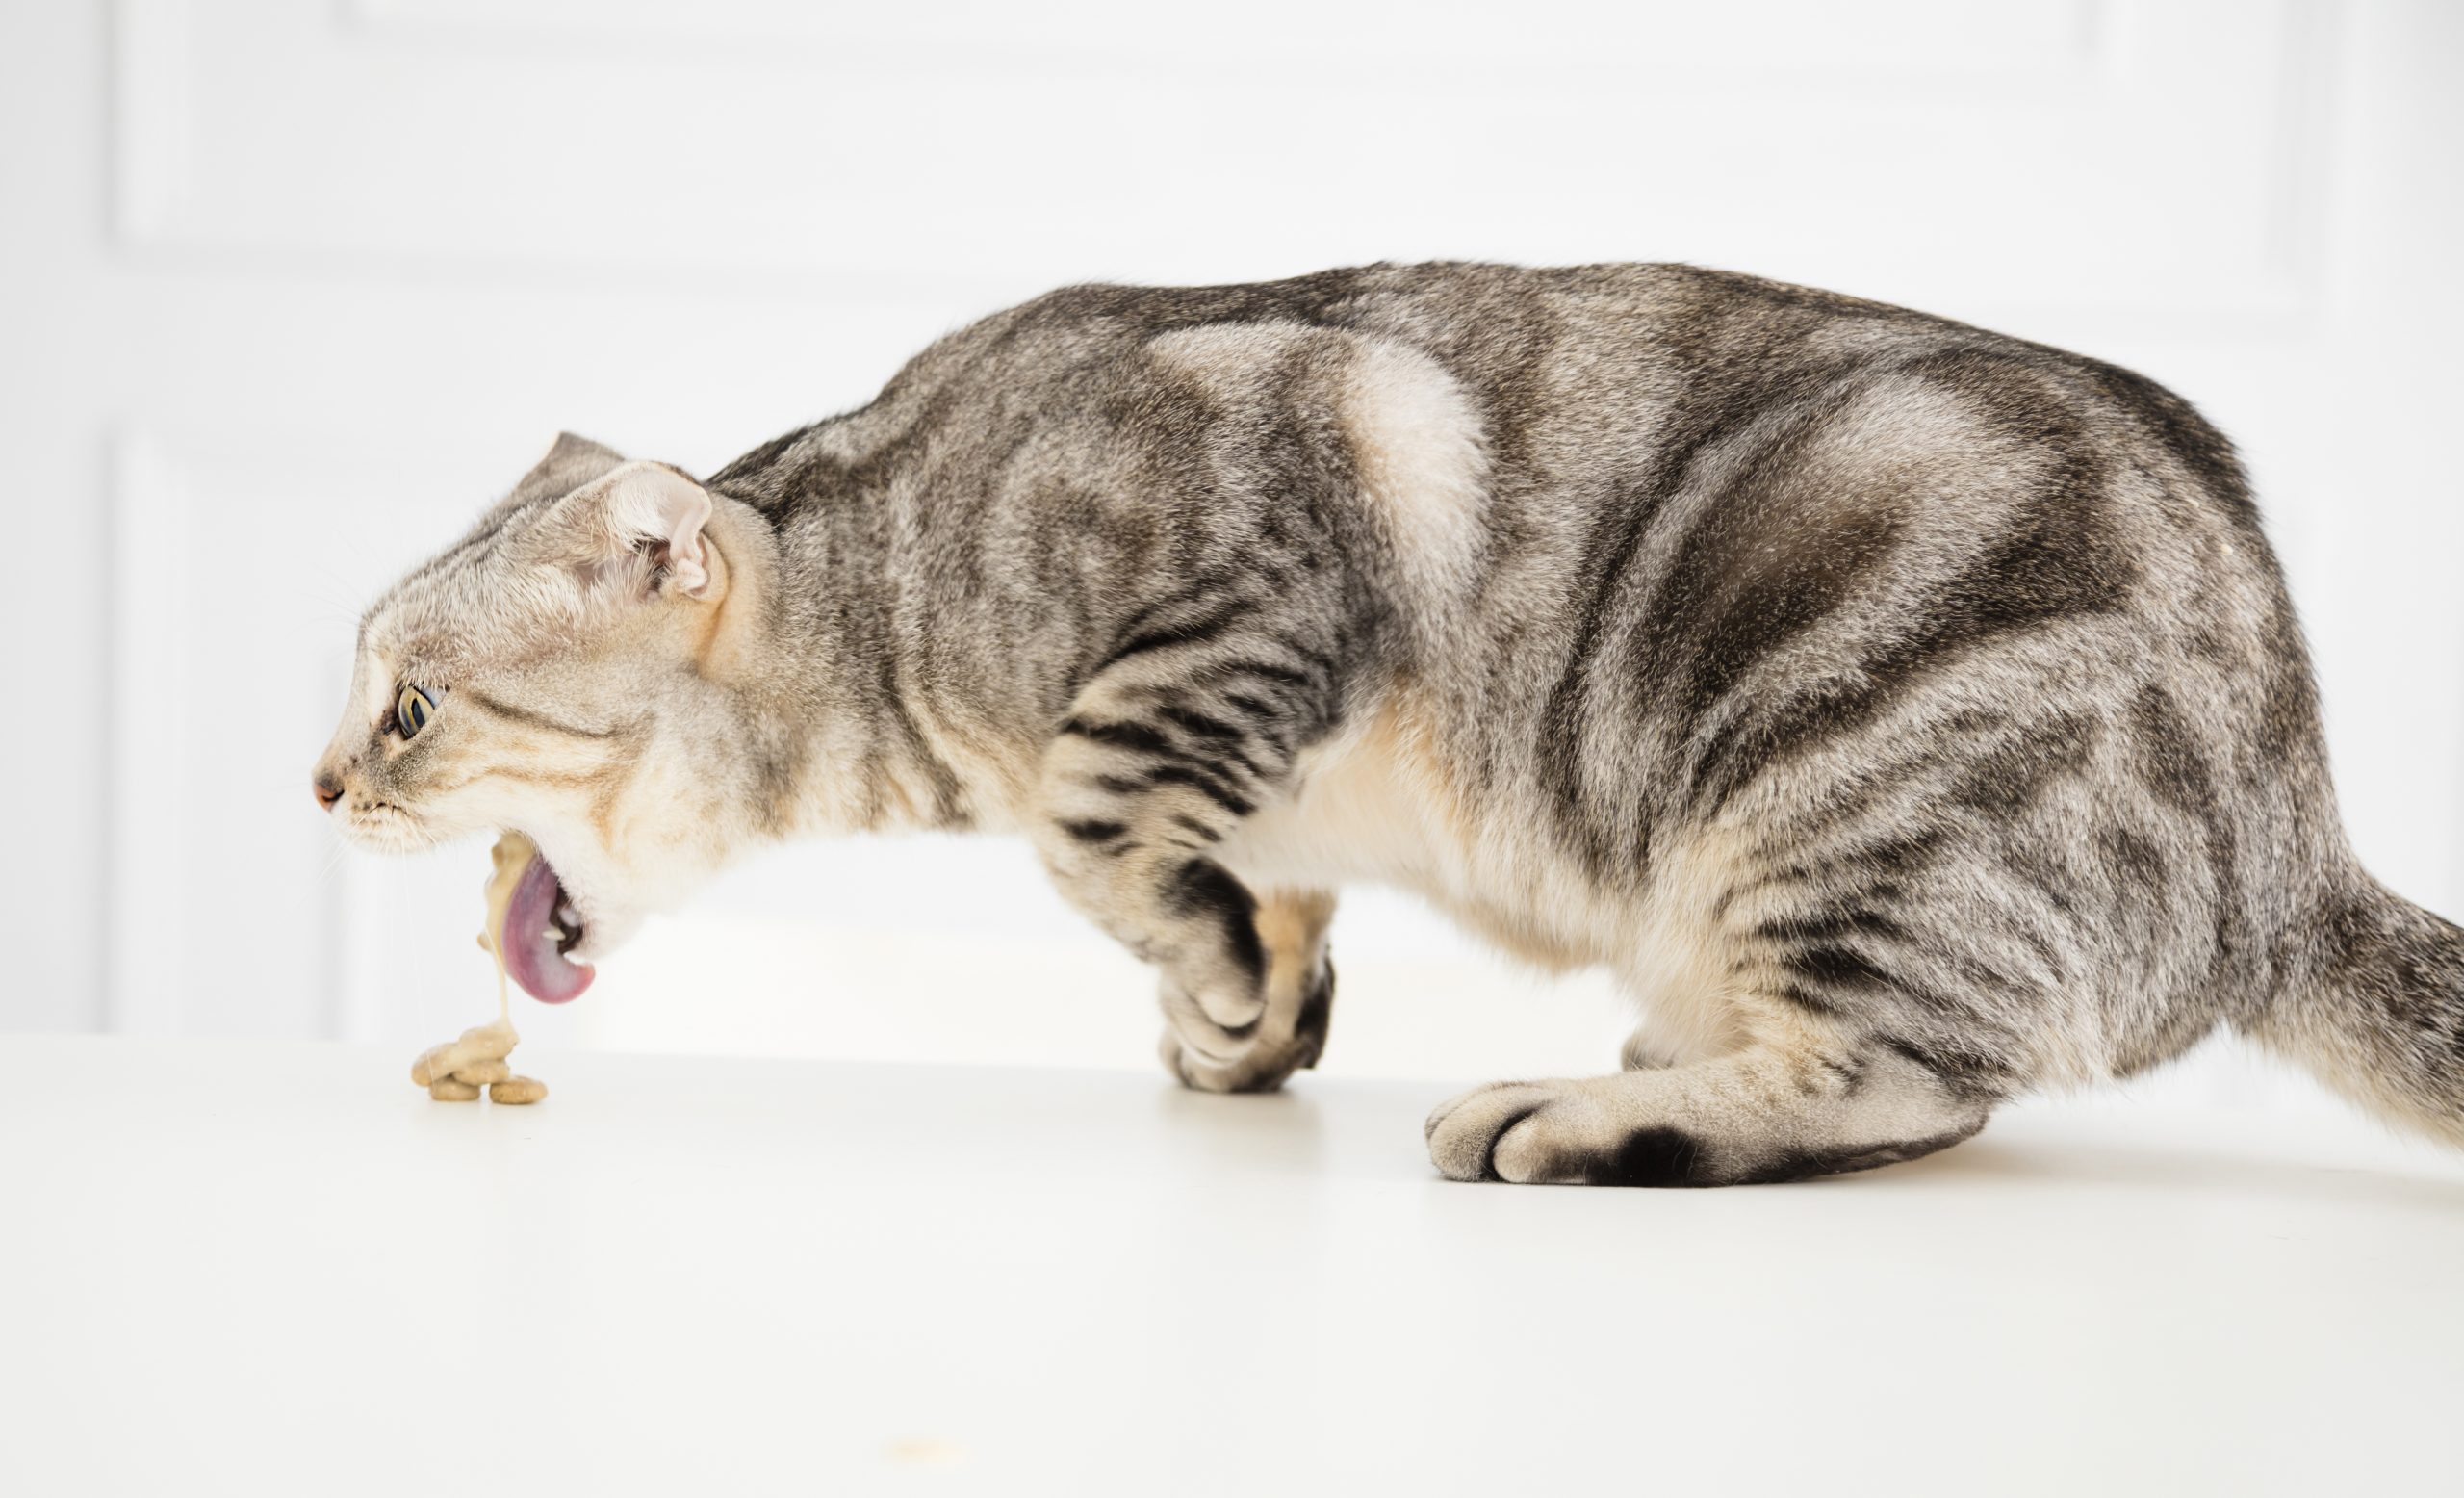 sick cat vomiting the food - Oakland Veterinary Referral Services | Oakland  Veterinary Referral Services